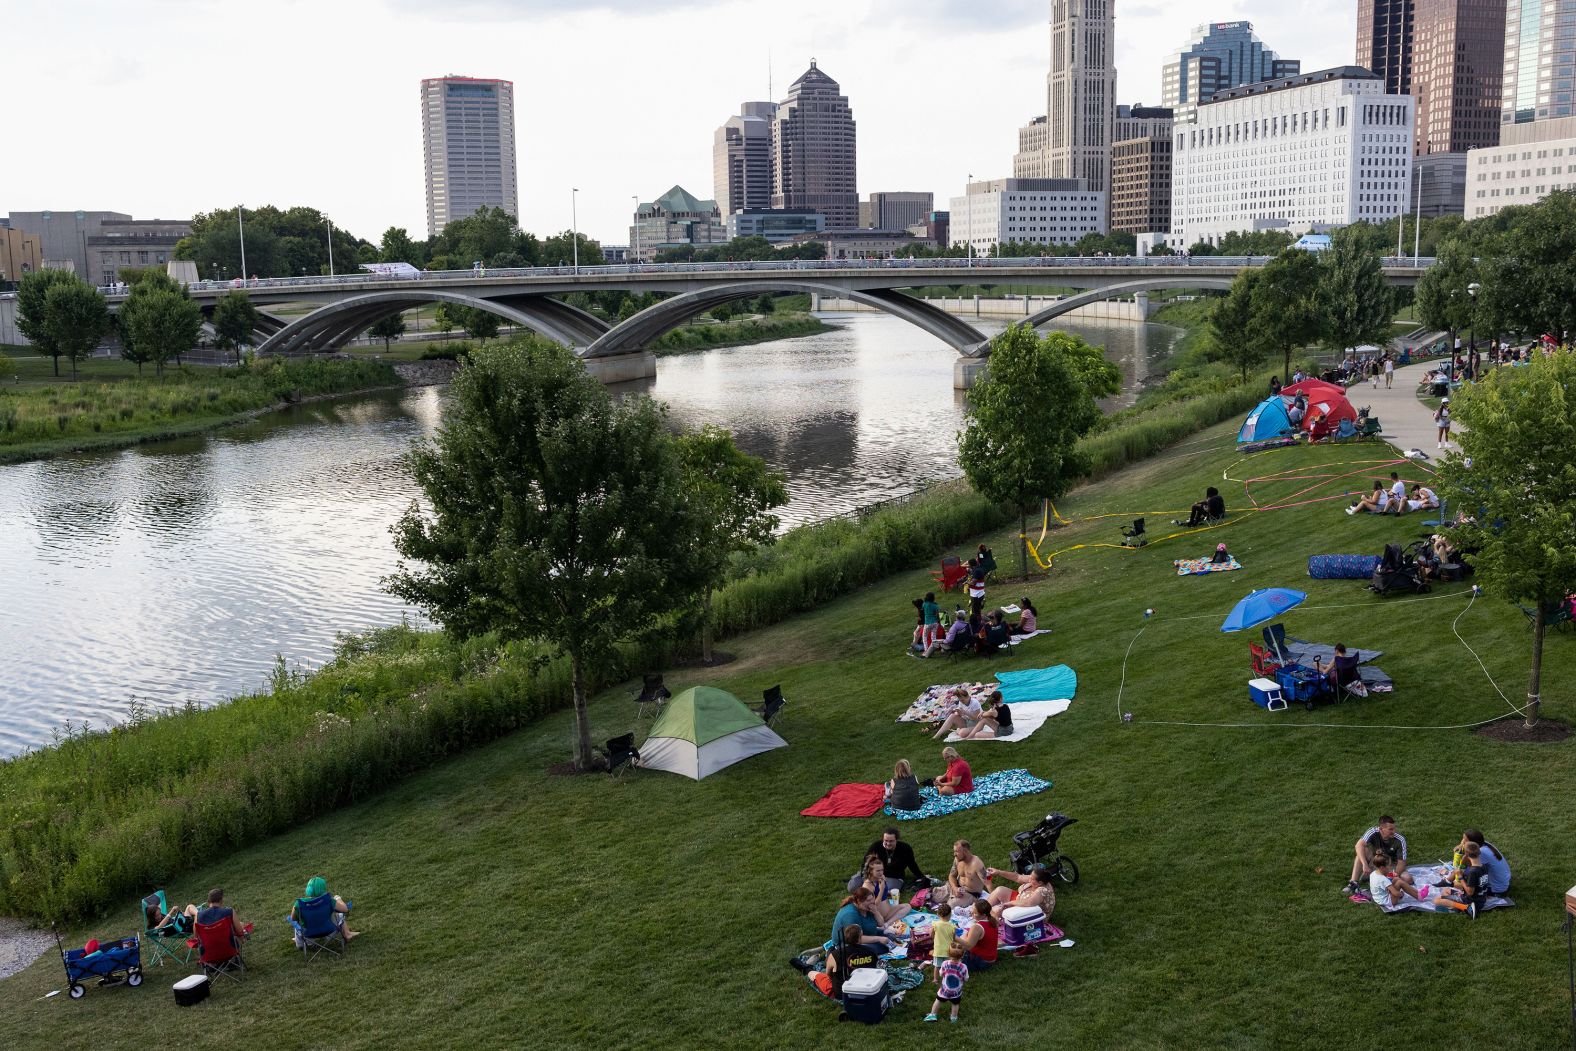 People set up blankets, foldable chairs and tents in Columbus' Bicentennial Park.